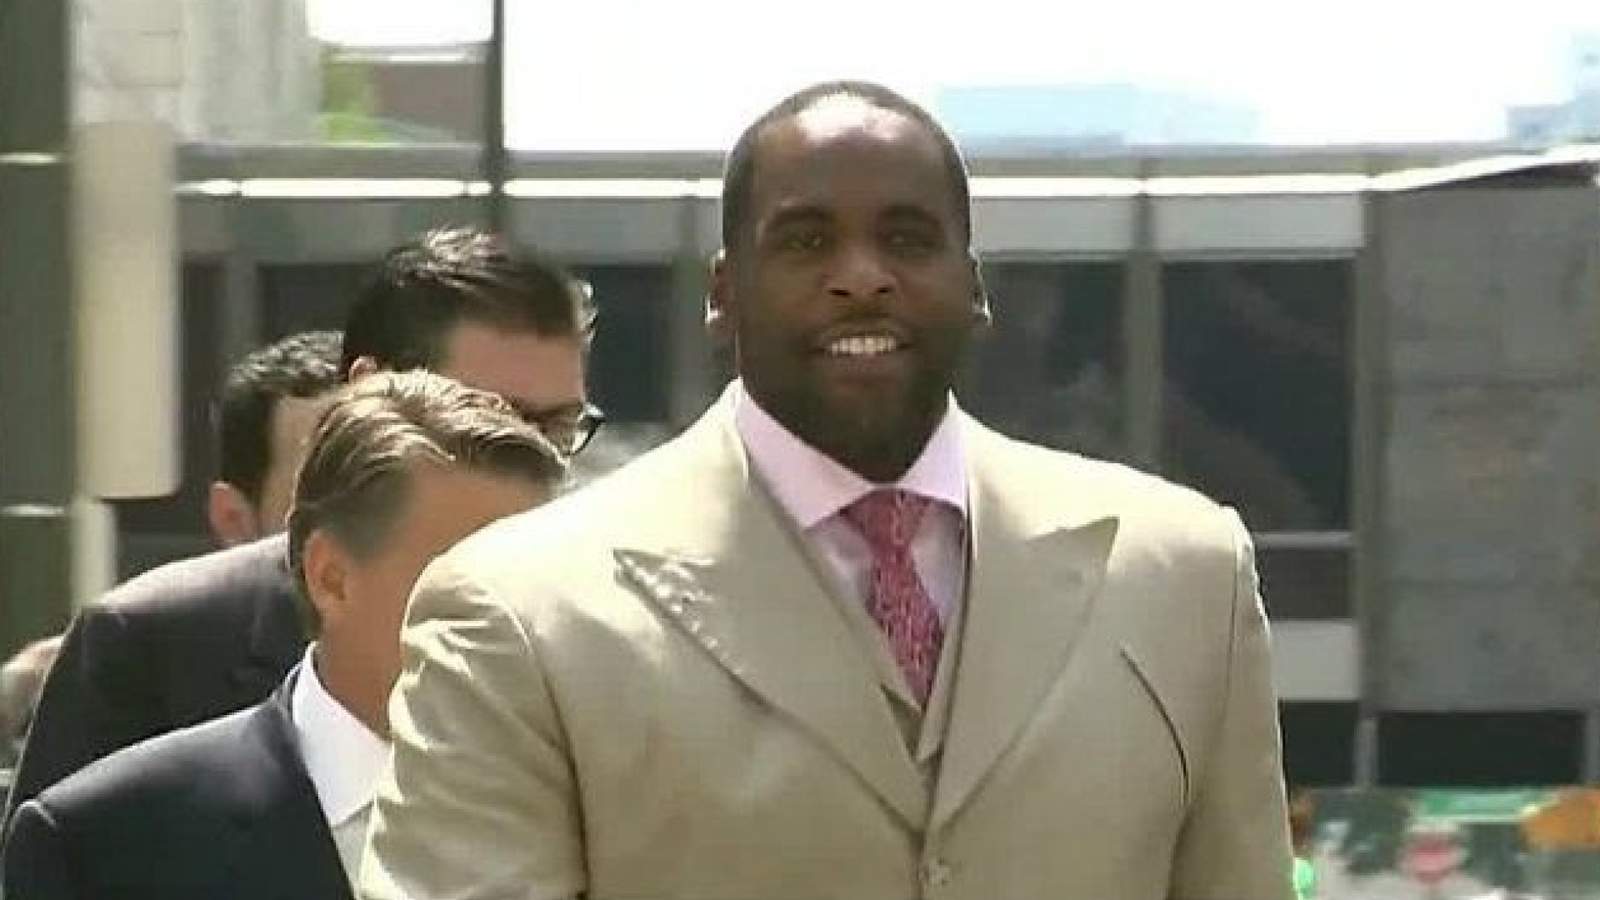 Kwame Kilpatrick loses another appeal to get out of federal prison